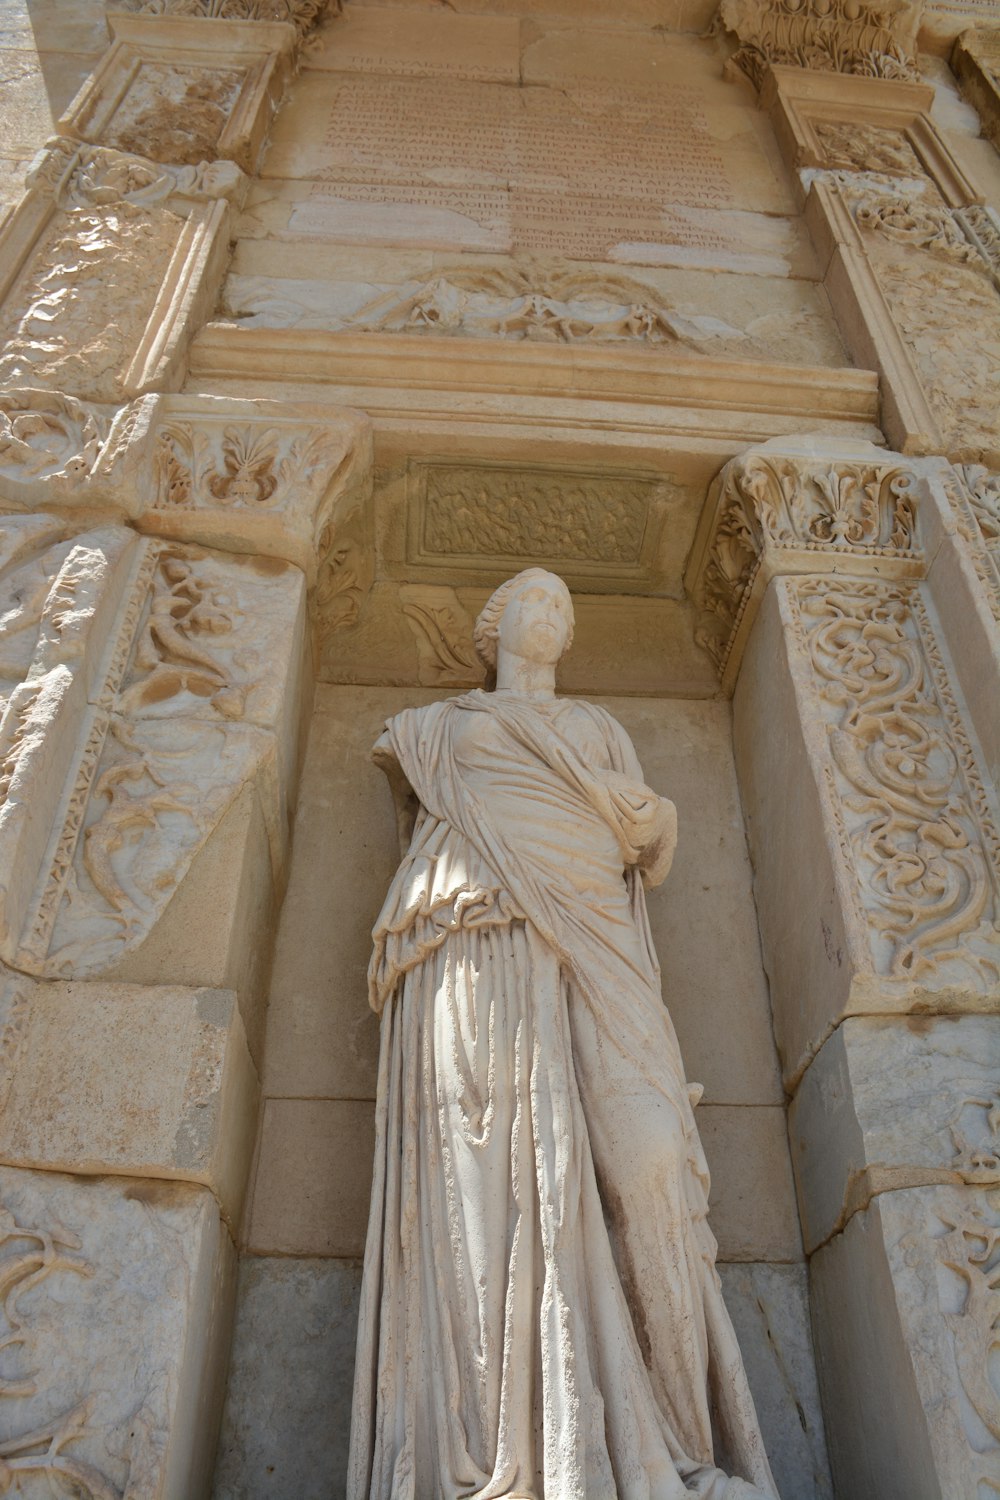 a statue of a woman standing in front of a building